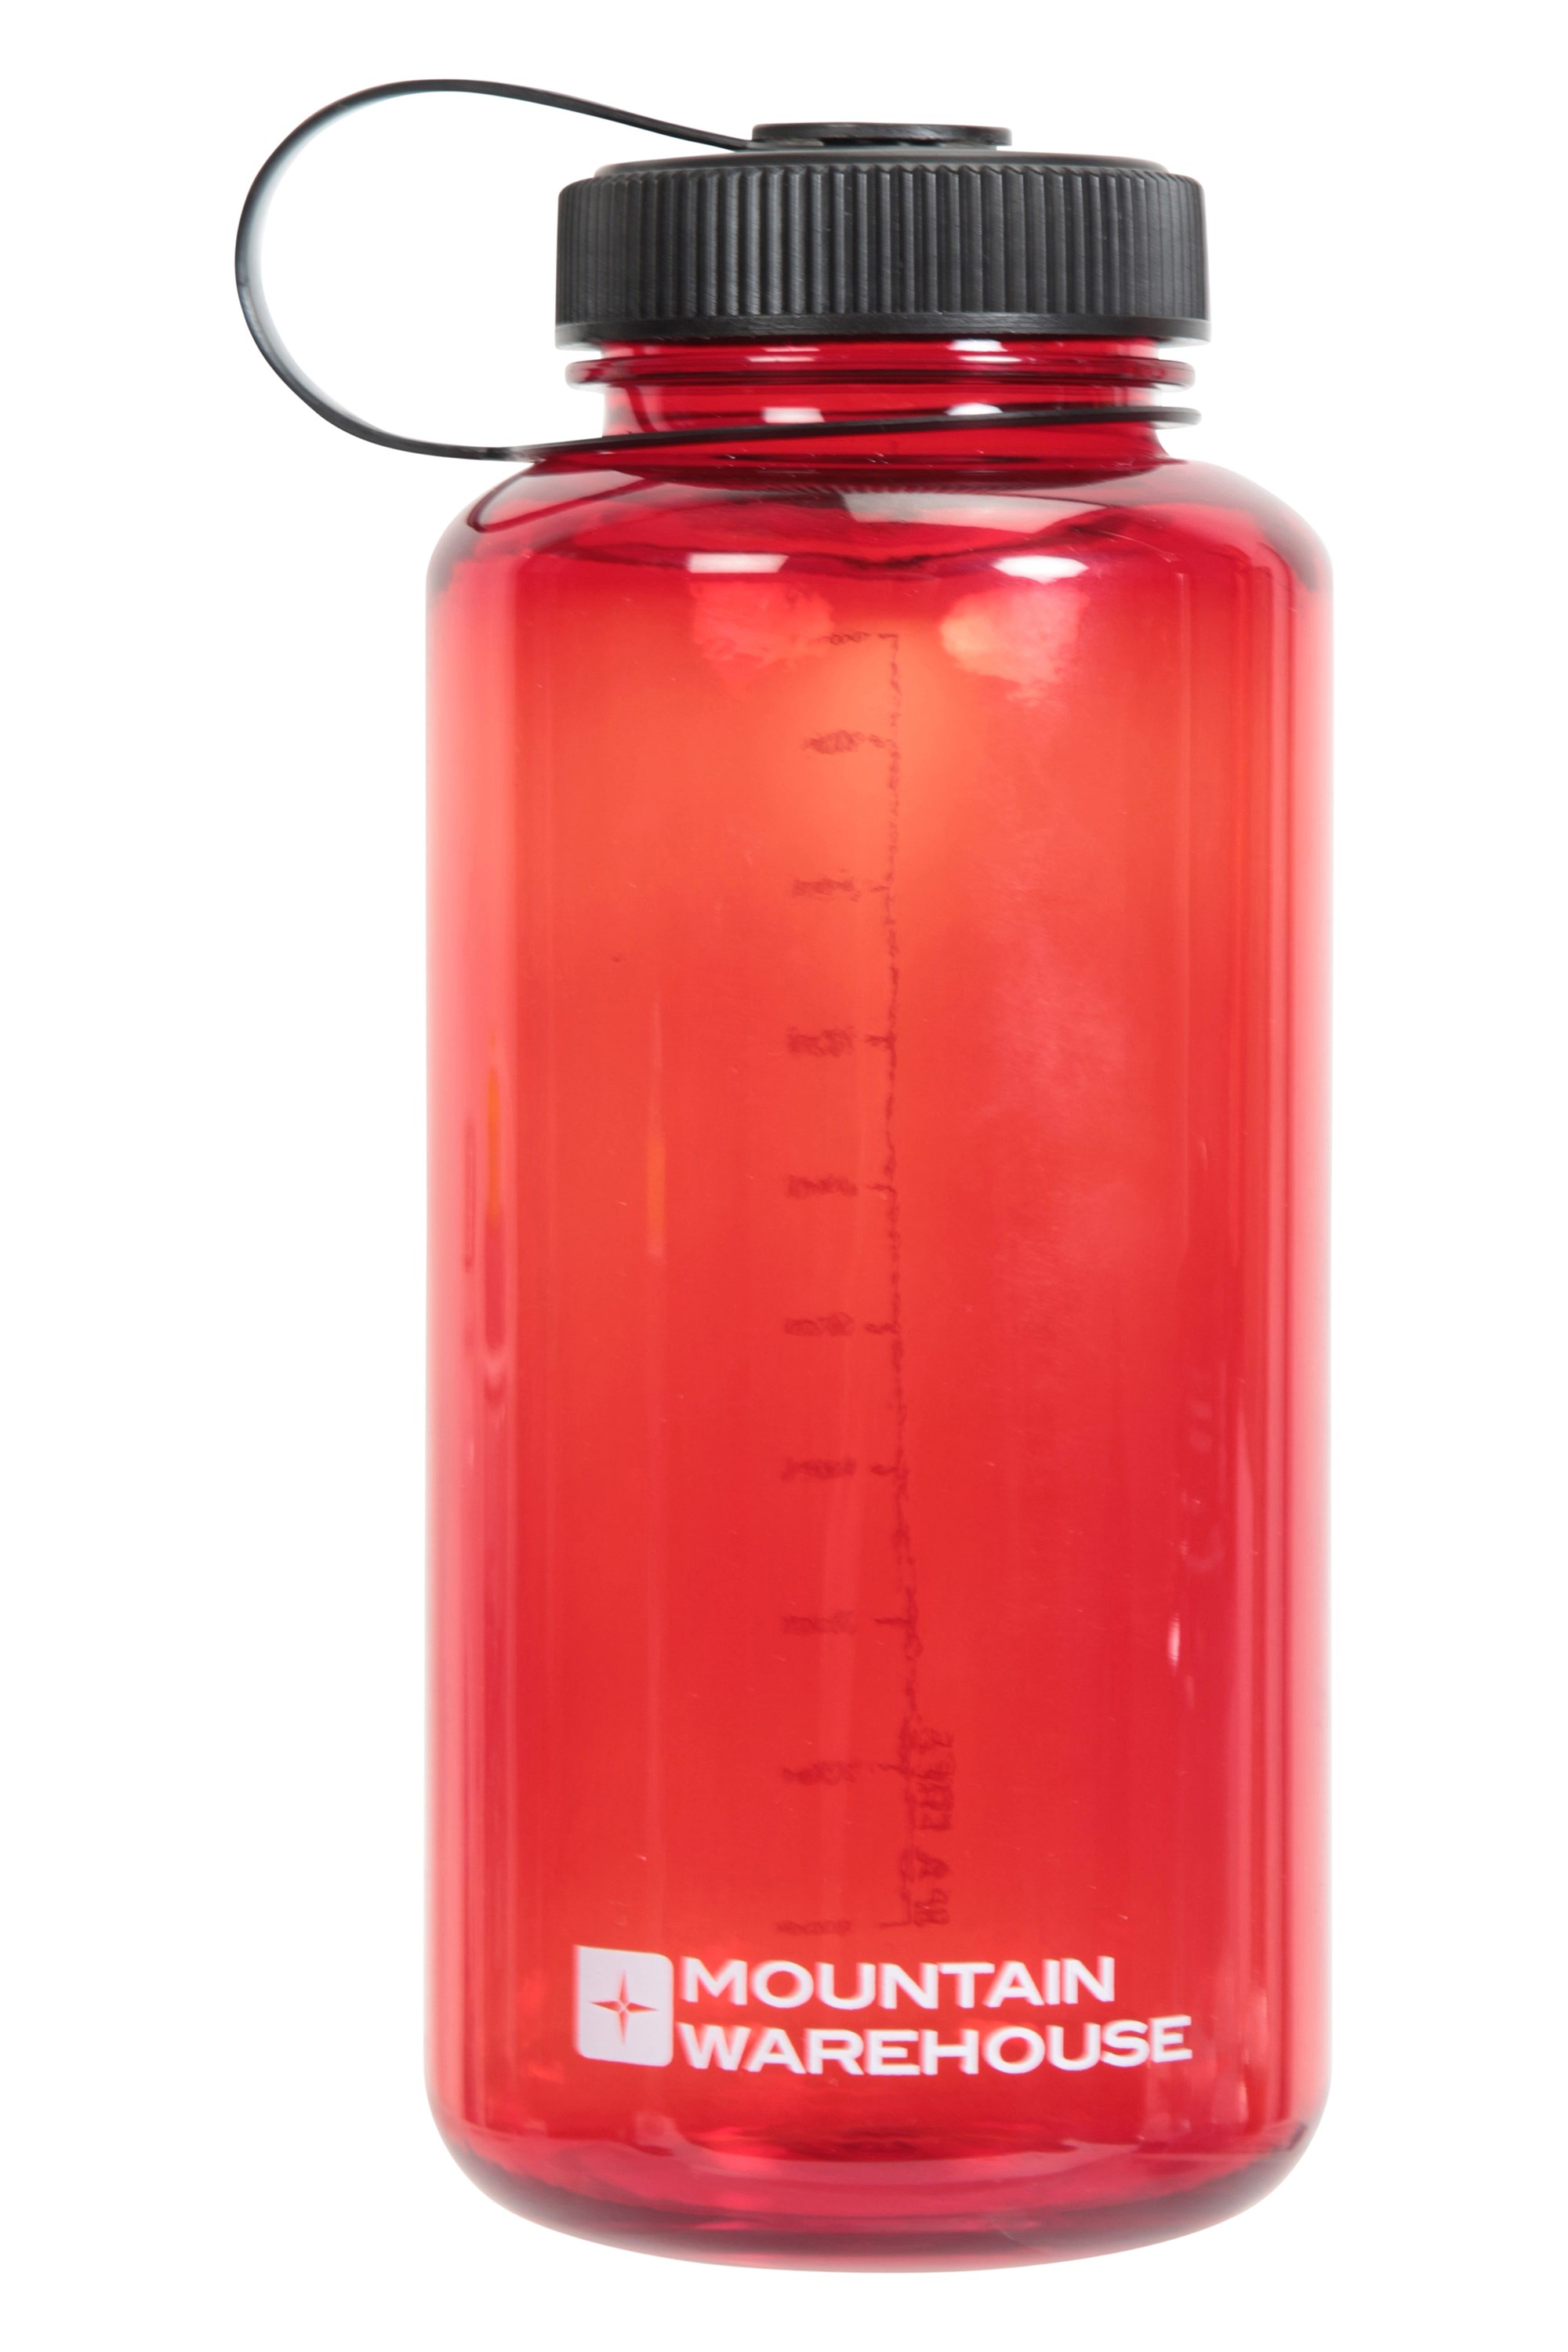 Bpa Free Plastic Water Bottle - 1 Litre - Red